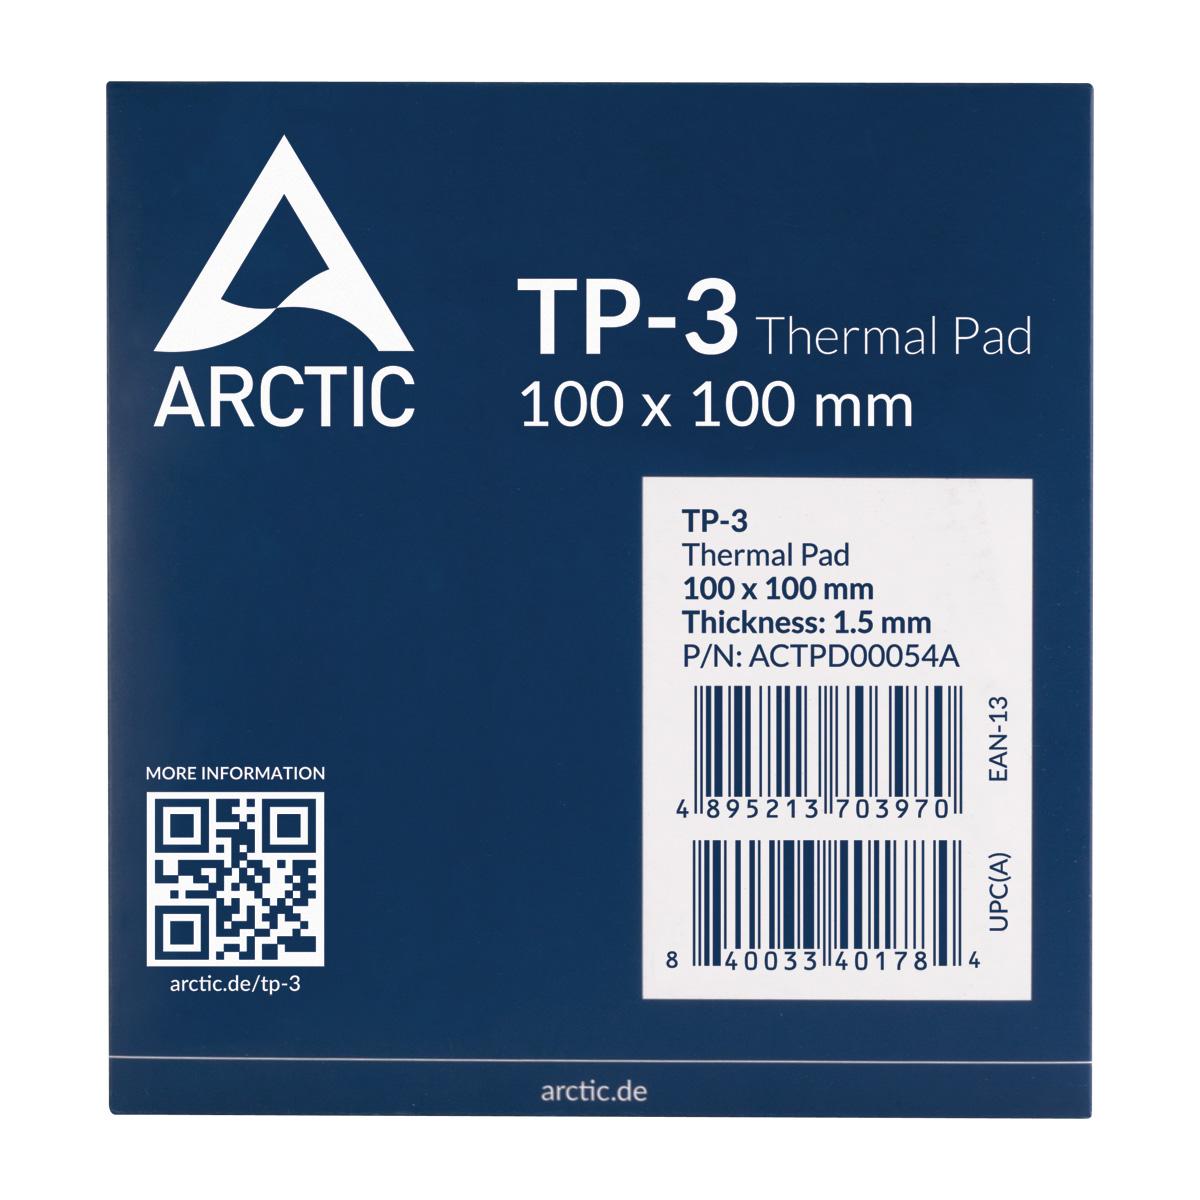 TP-3_100x100mm_1.5mm_Packaging